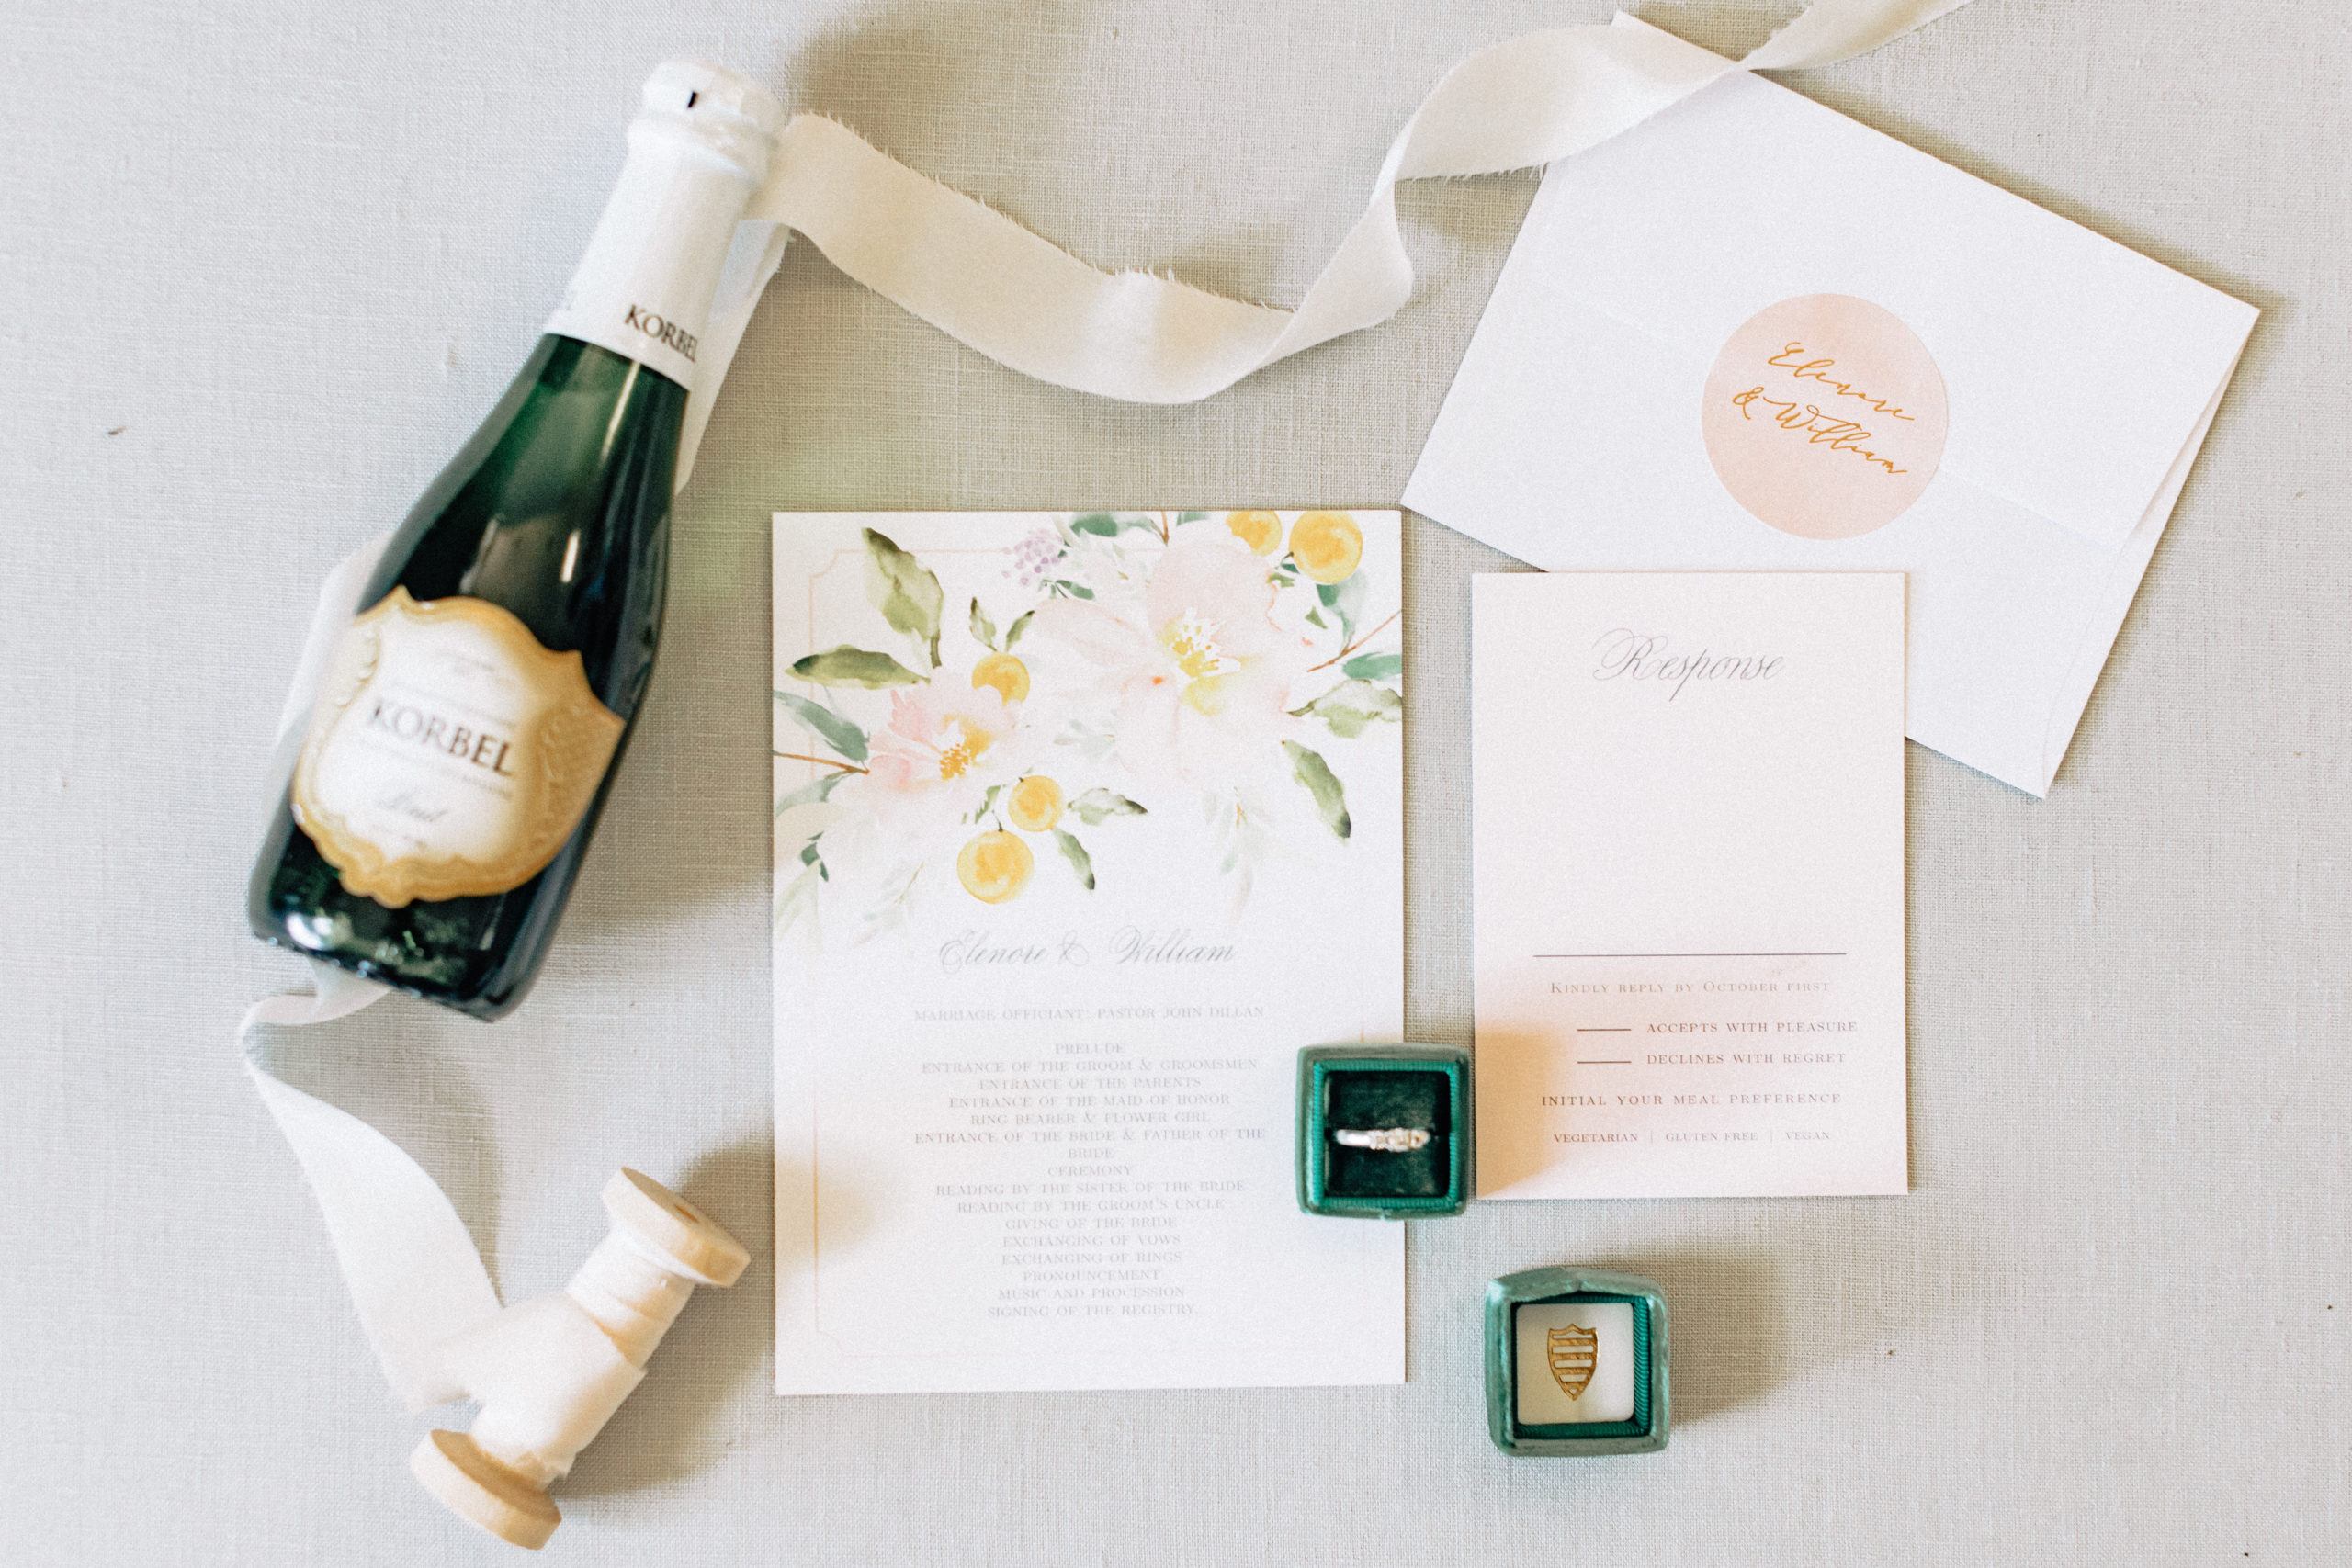 Basic Invite Customizable Wedding Stationery by Lily and Sparrow Photo Co